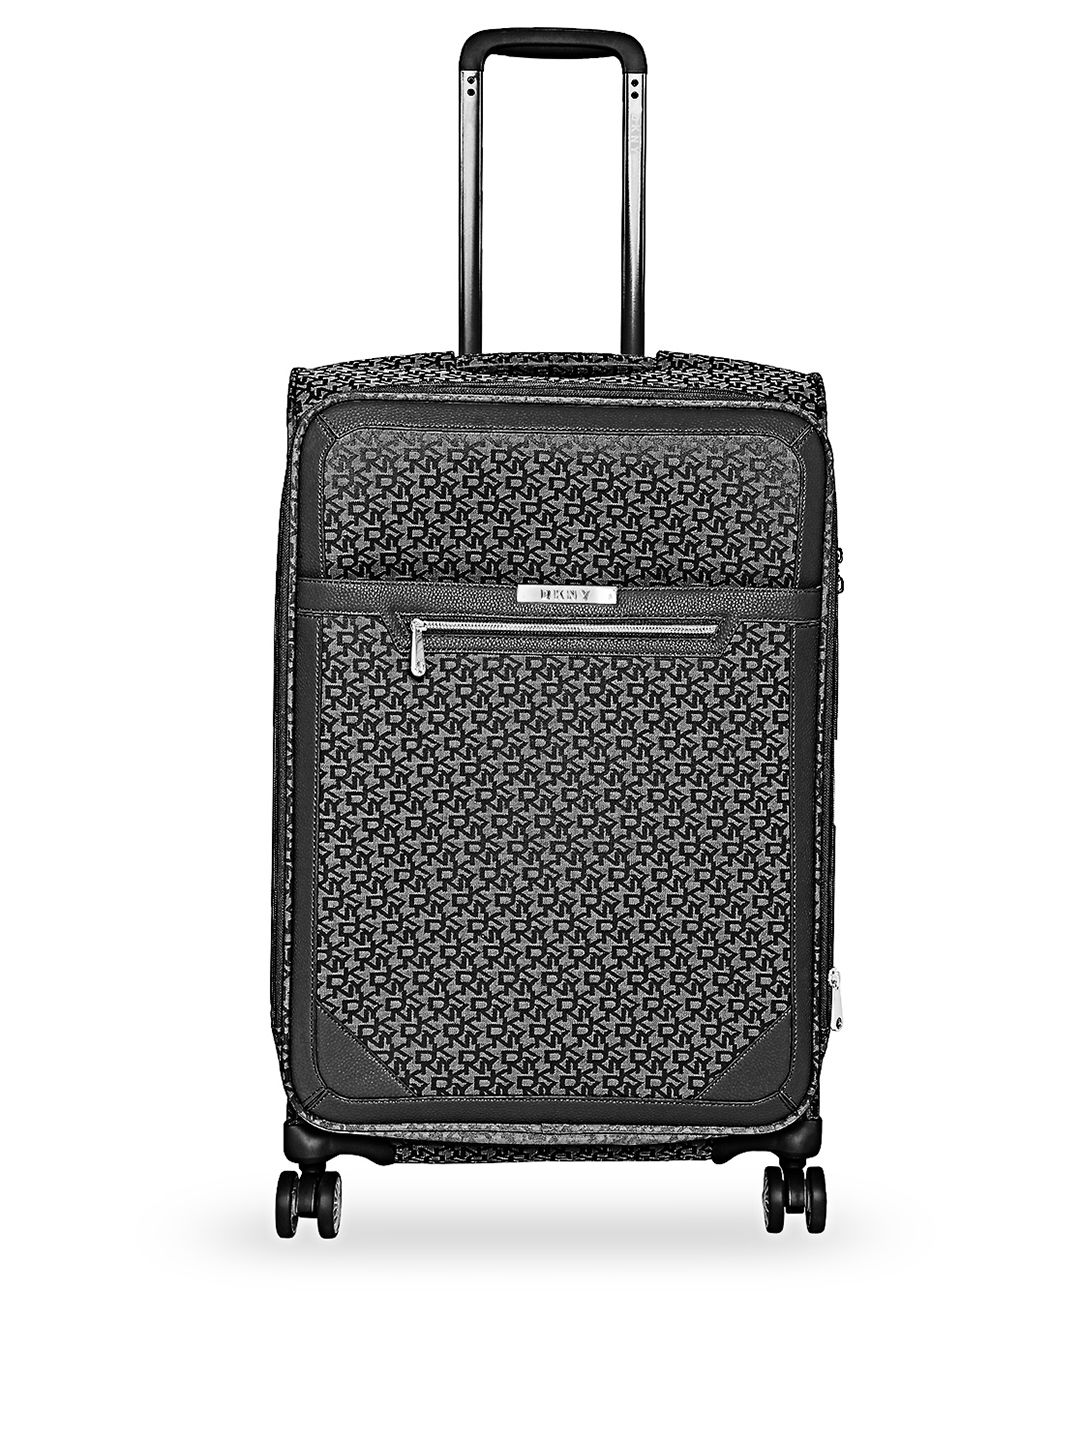 DKNY Black Patterned Signature Softs Soft-Sided Cabin Trolley Suitcase Price in India